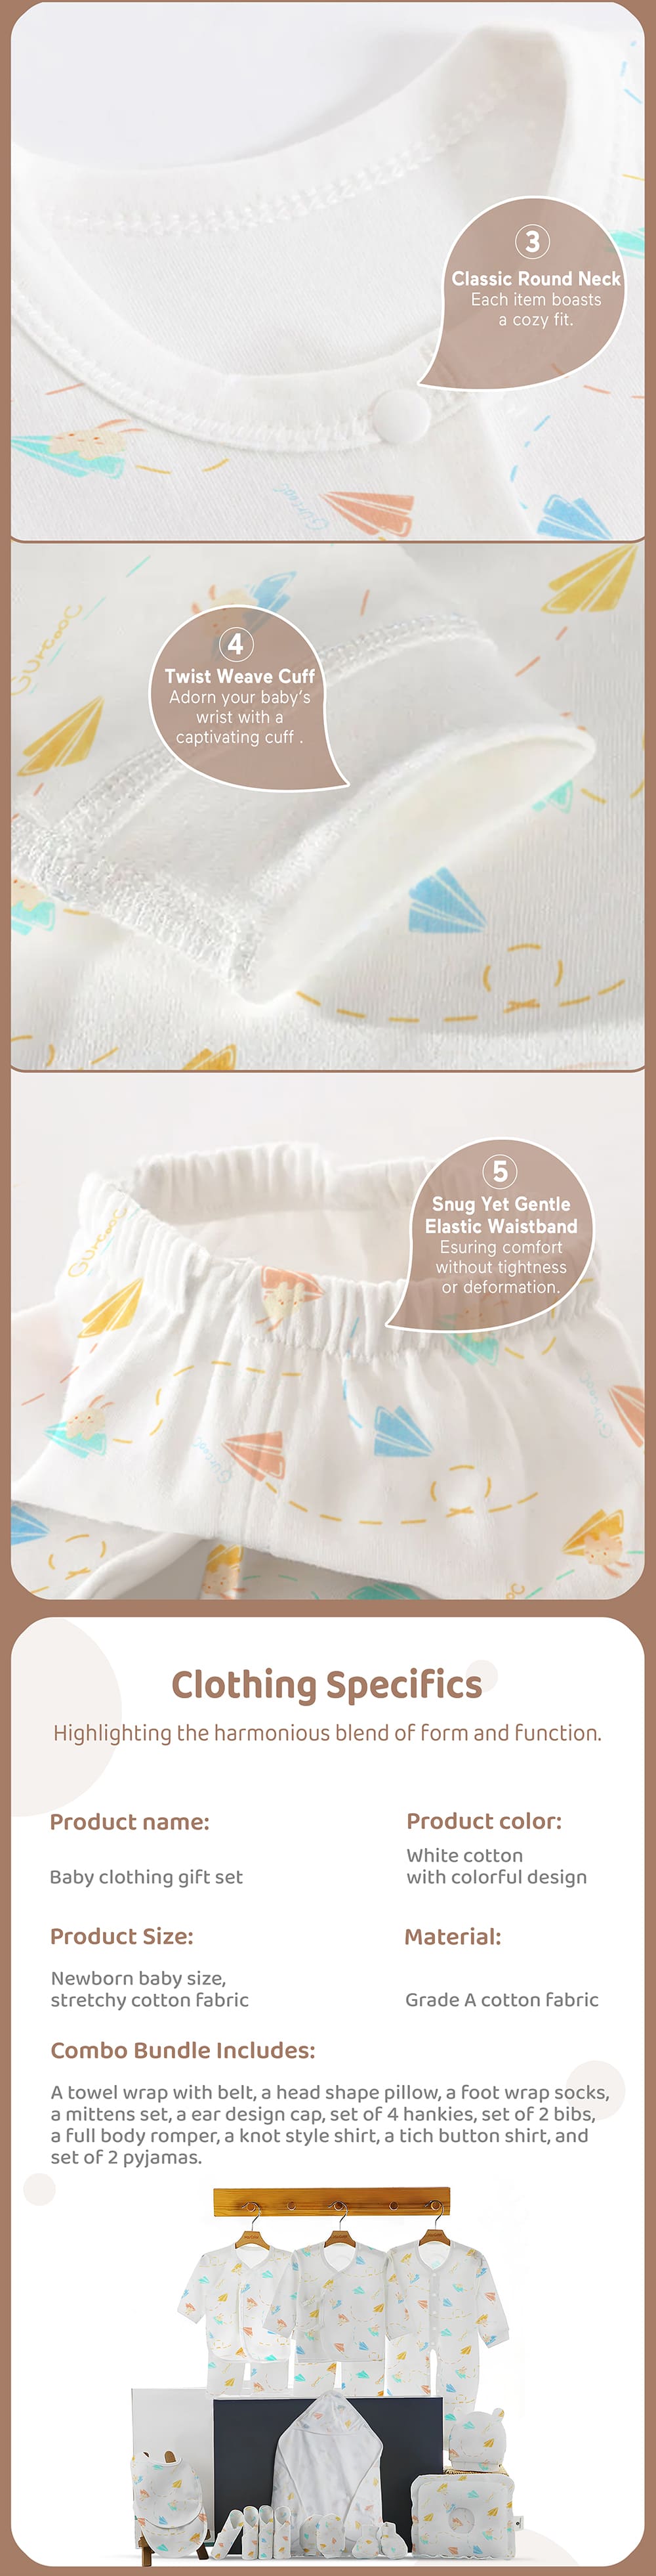 New Born Baby Clothing Gifts Set